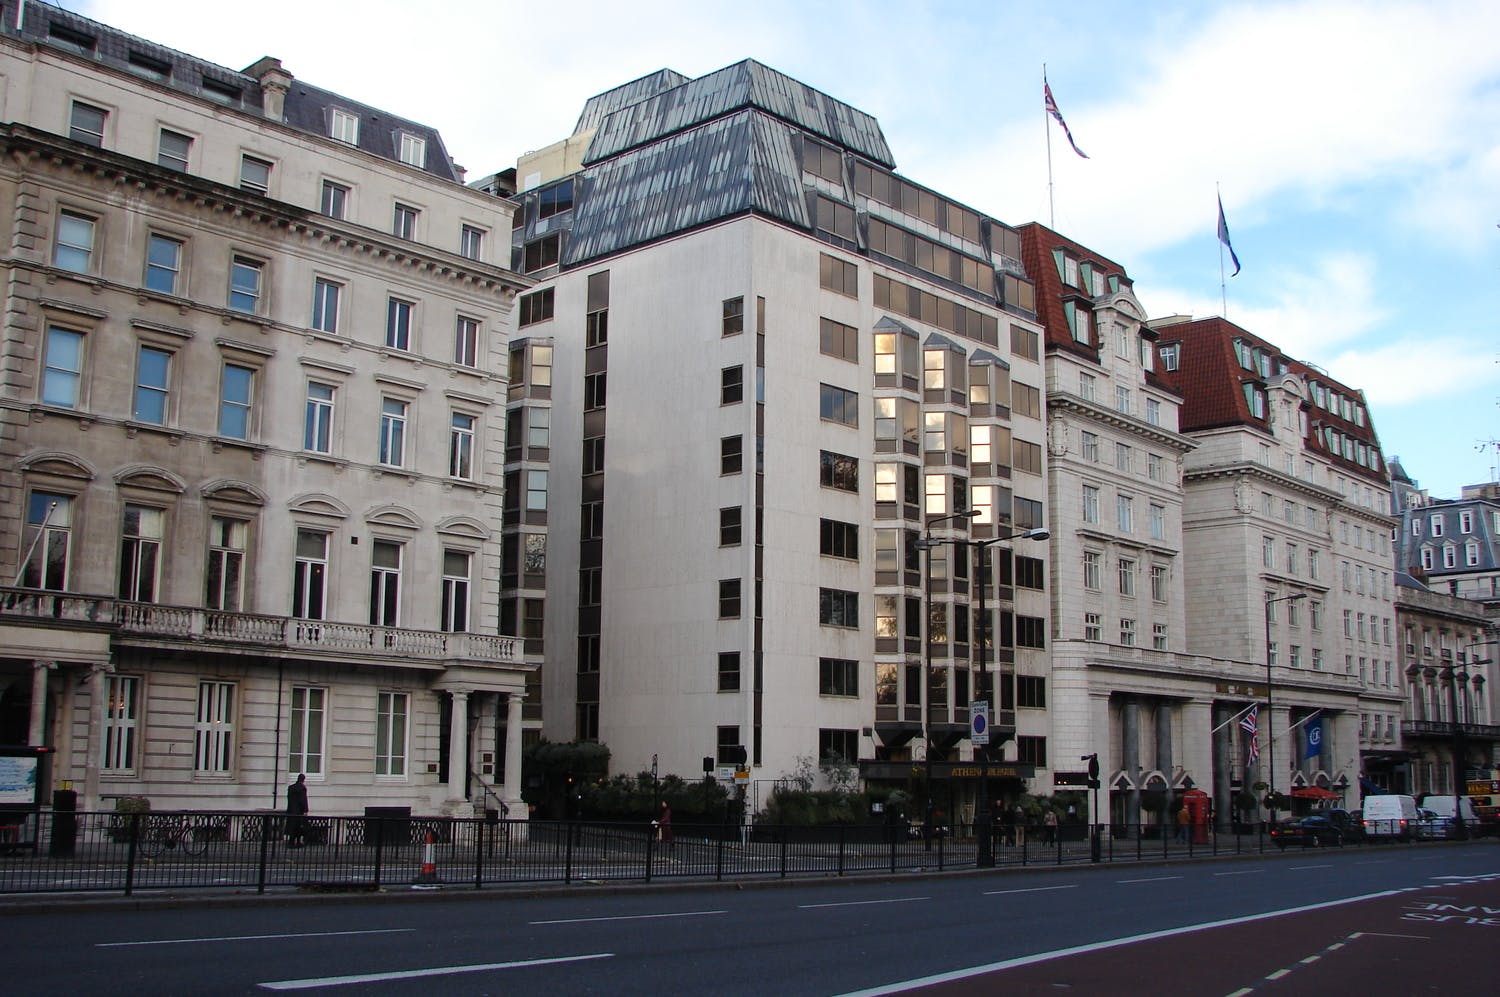 The luxury, Art Deco Athenaeum Hotel in Piccadilly, London, before renovations